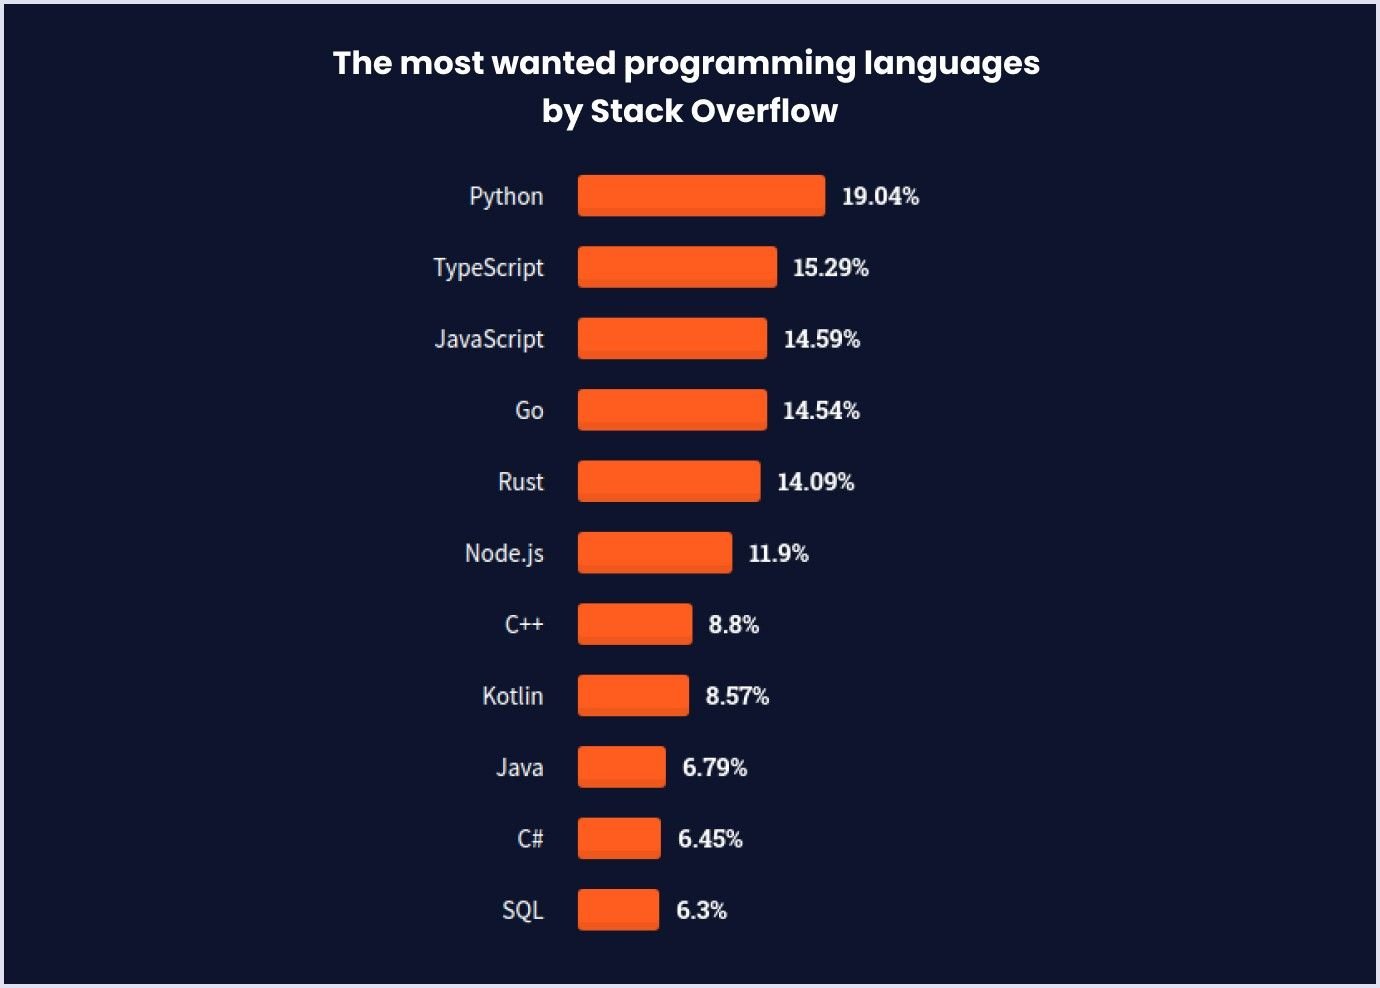 Python as the most wanted programming language by Stack Overflow